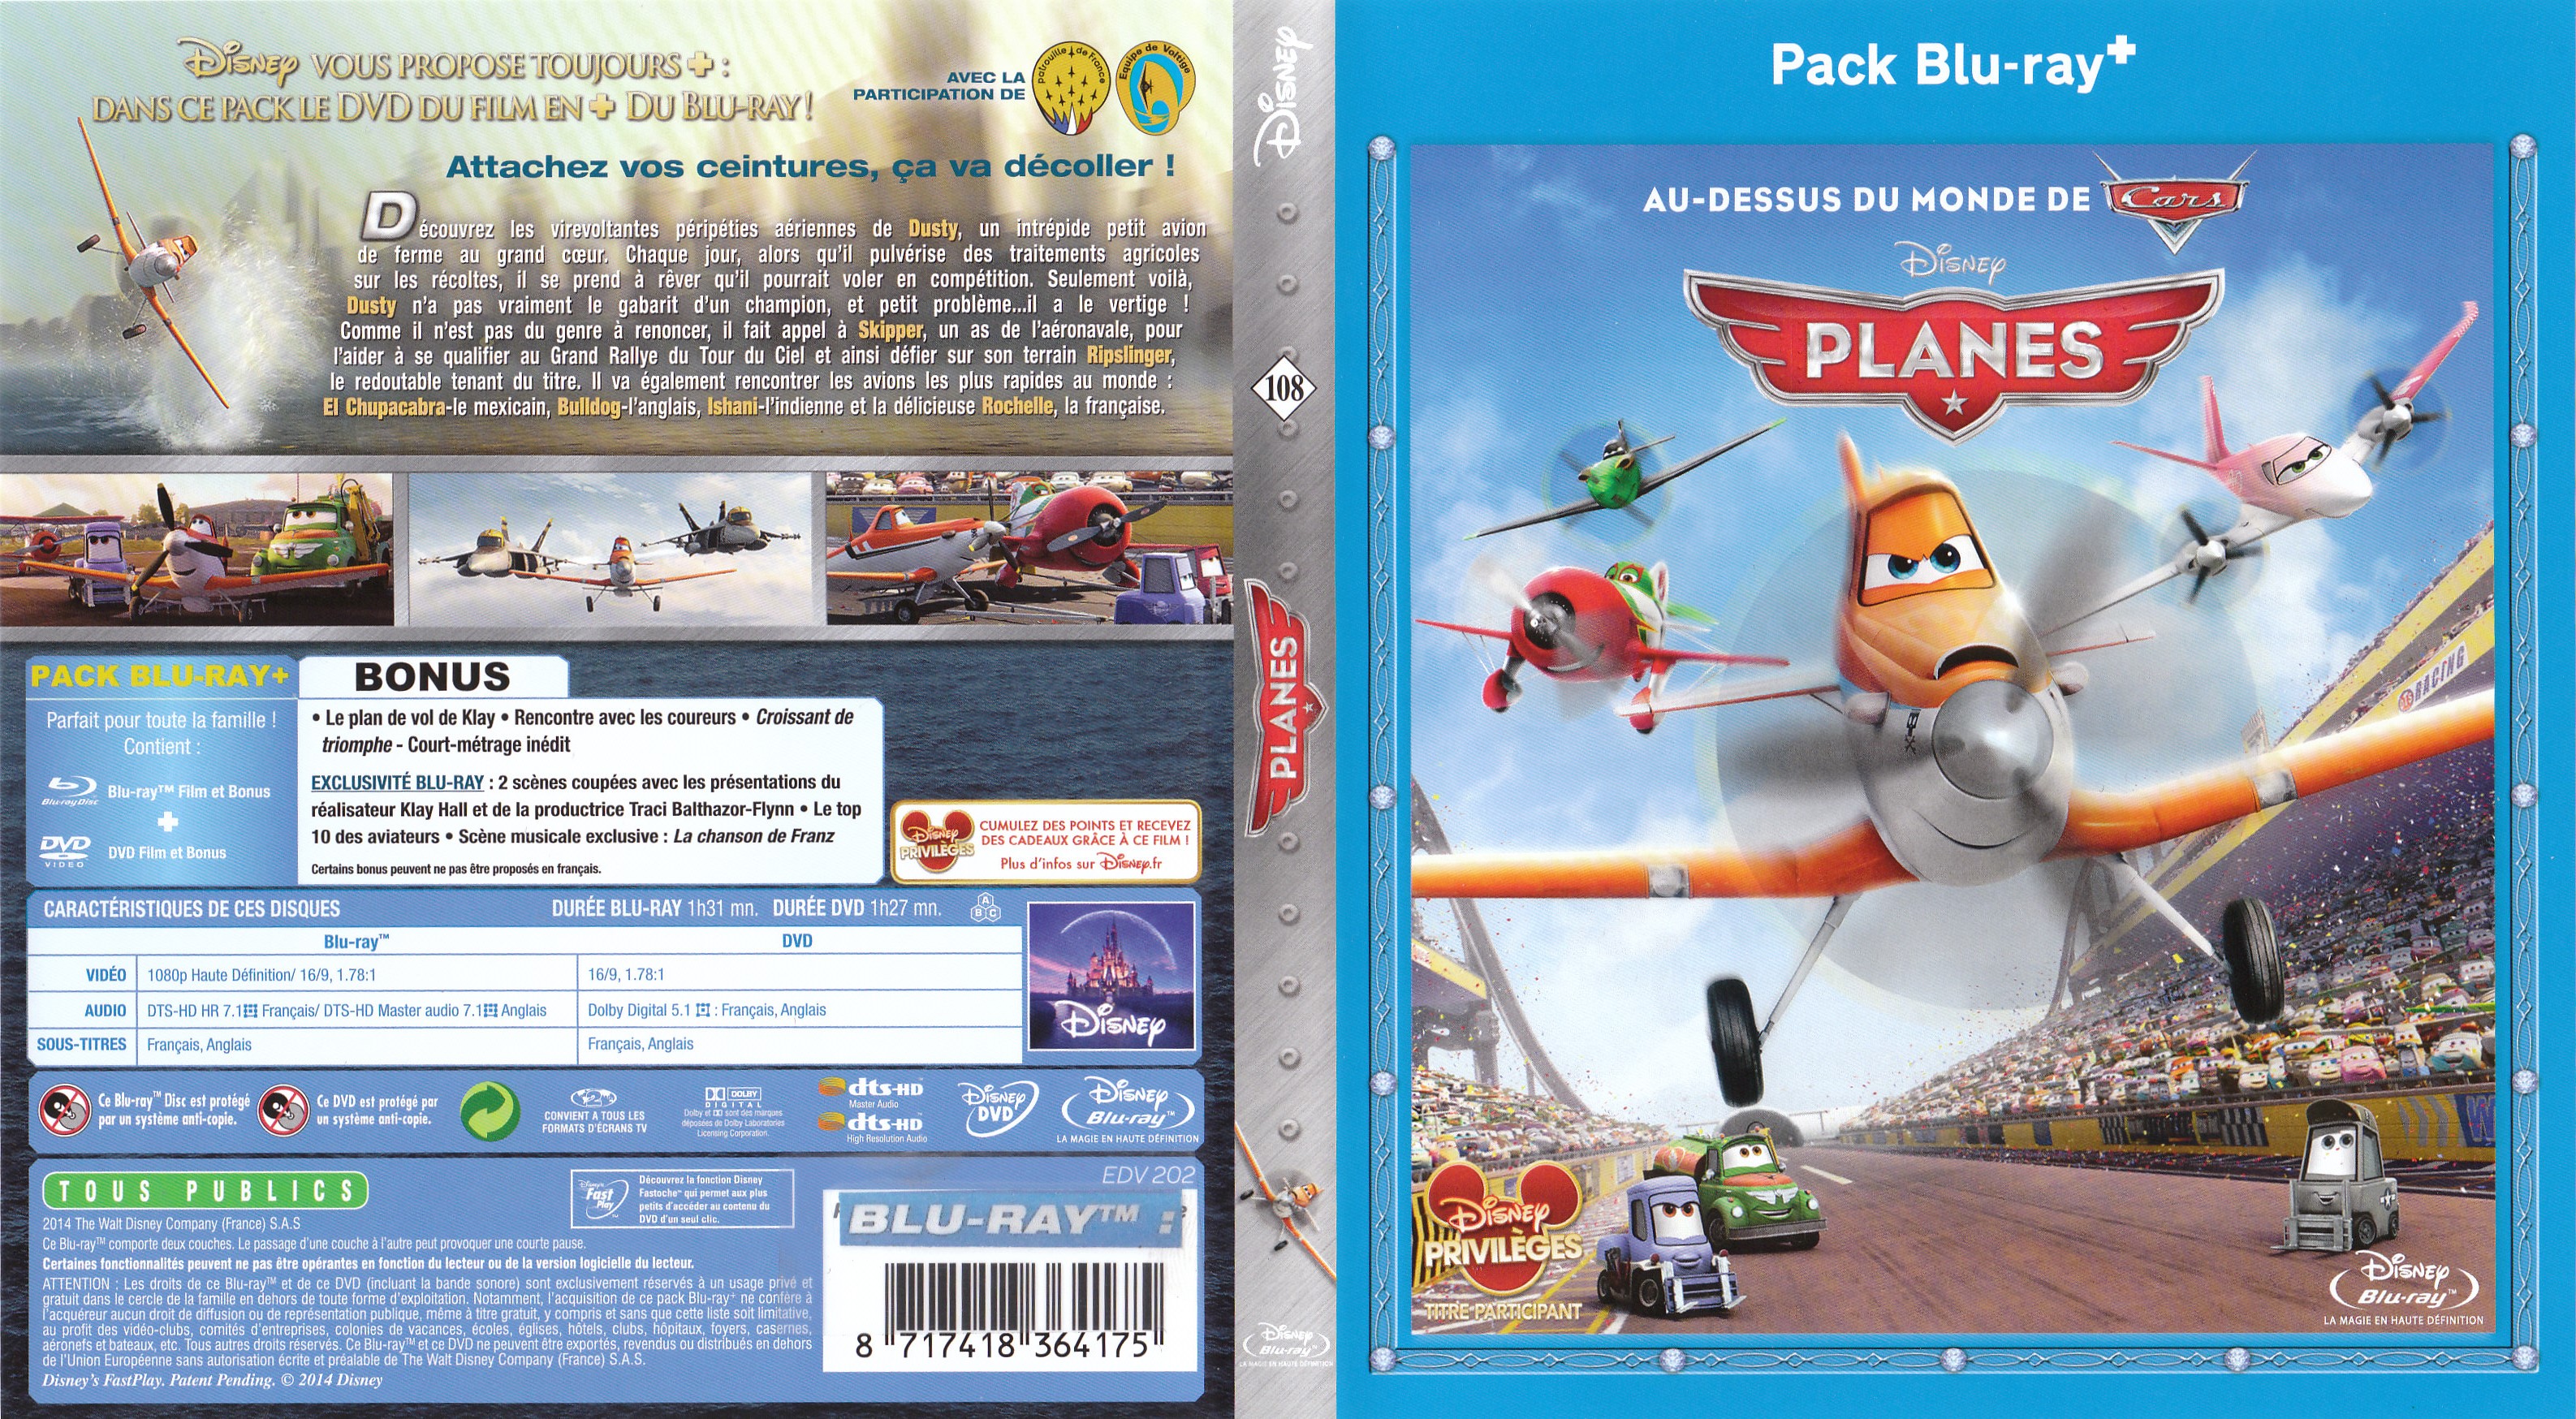 Jaquette DVD Planes (BLU-RAY)